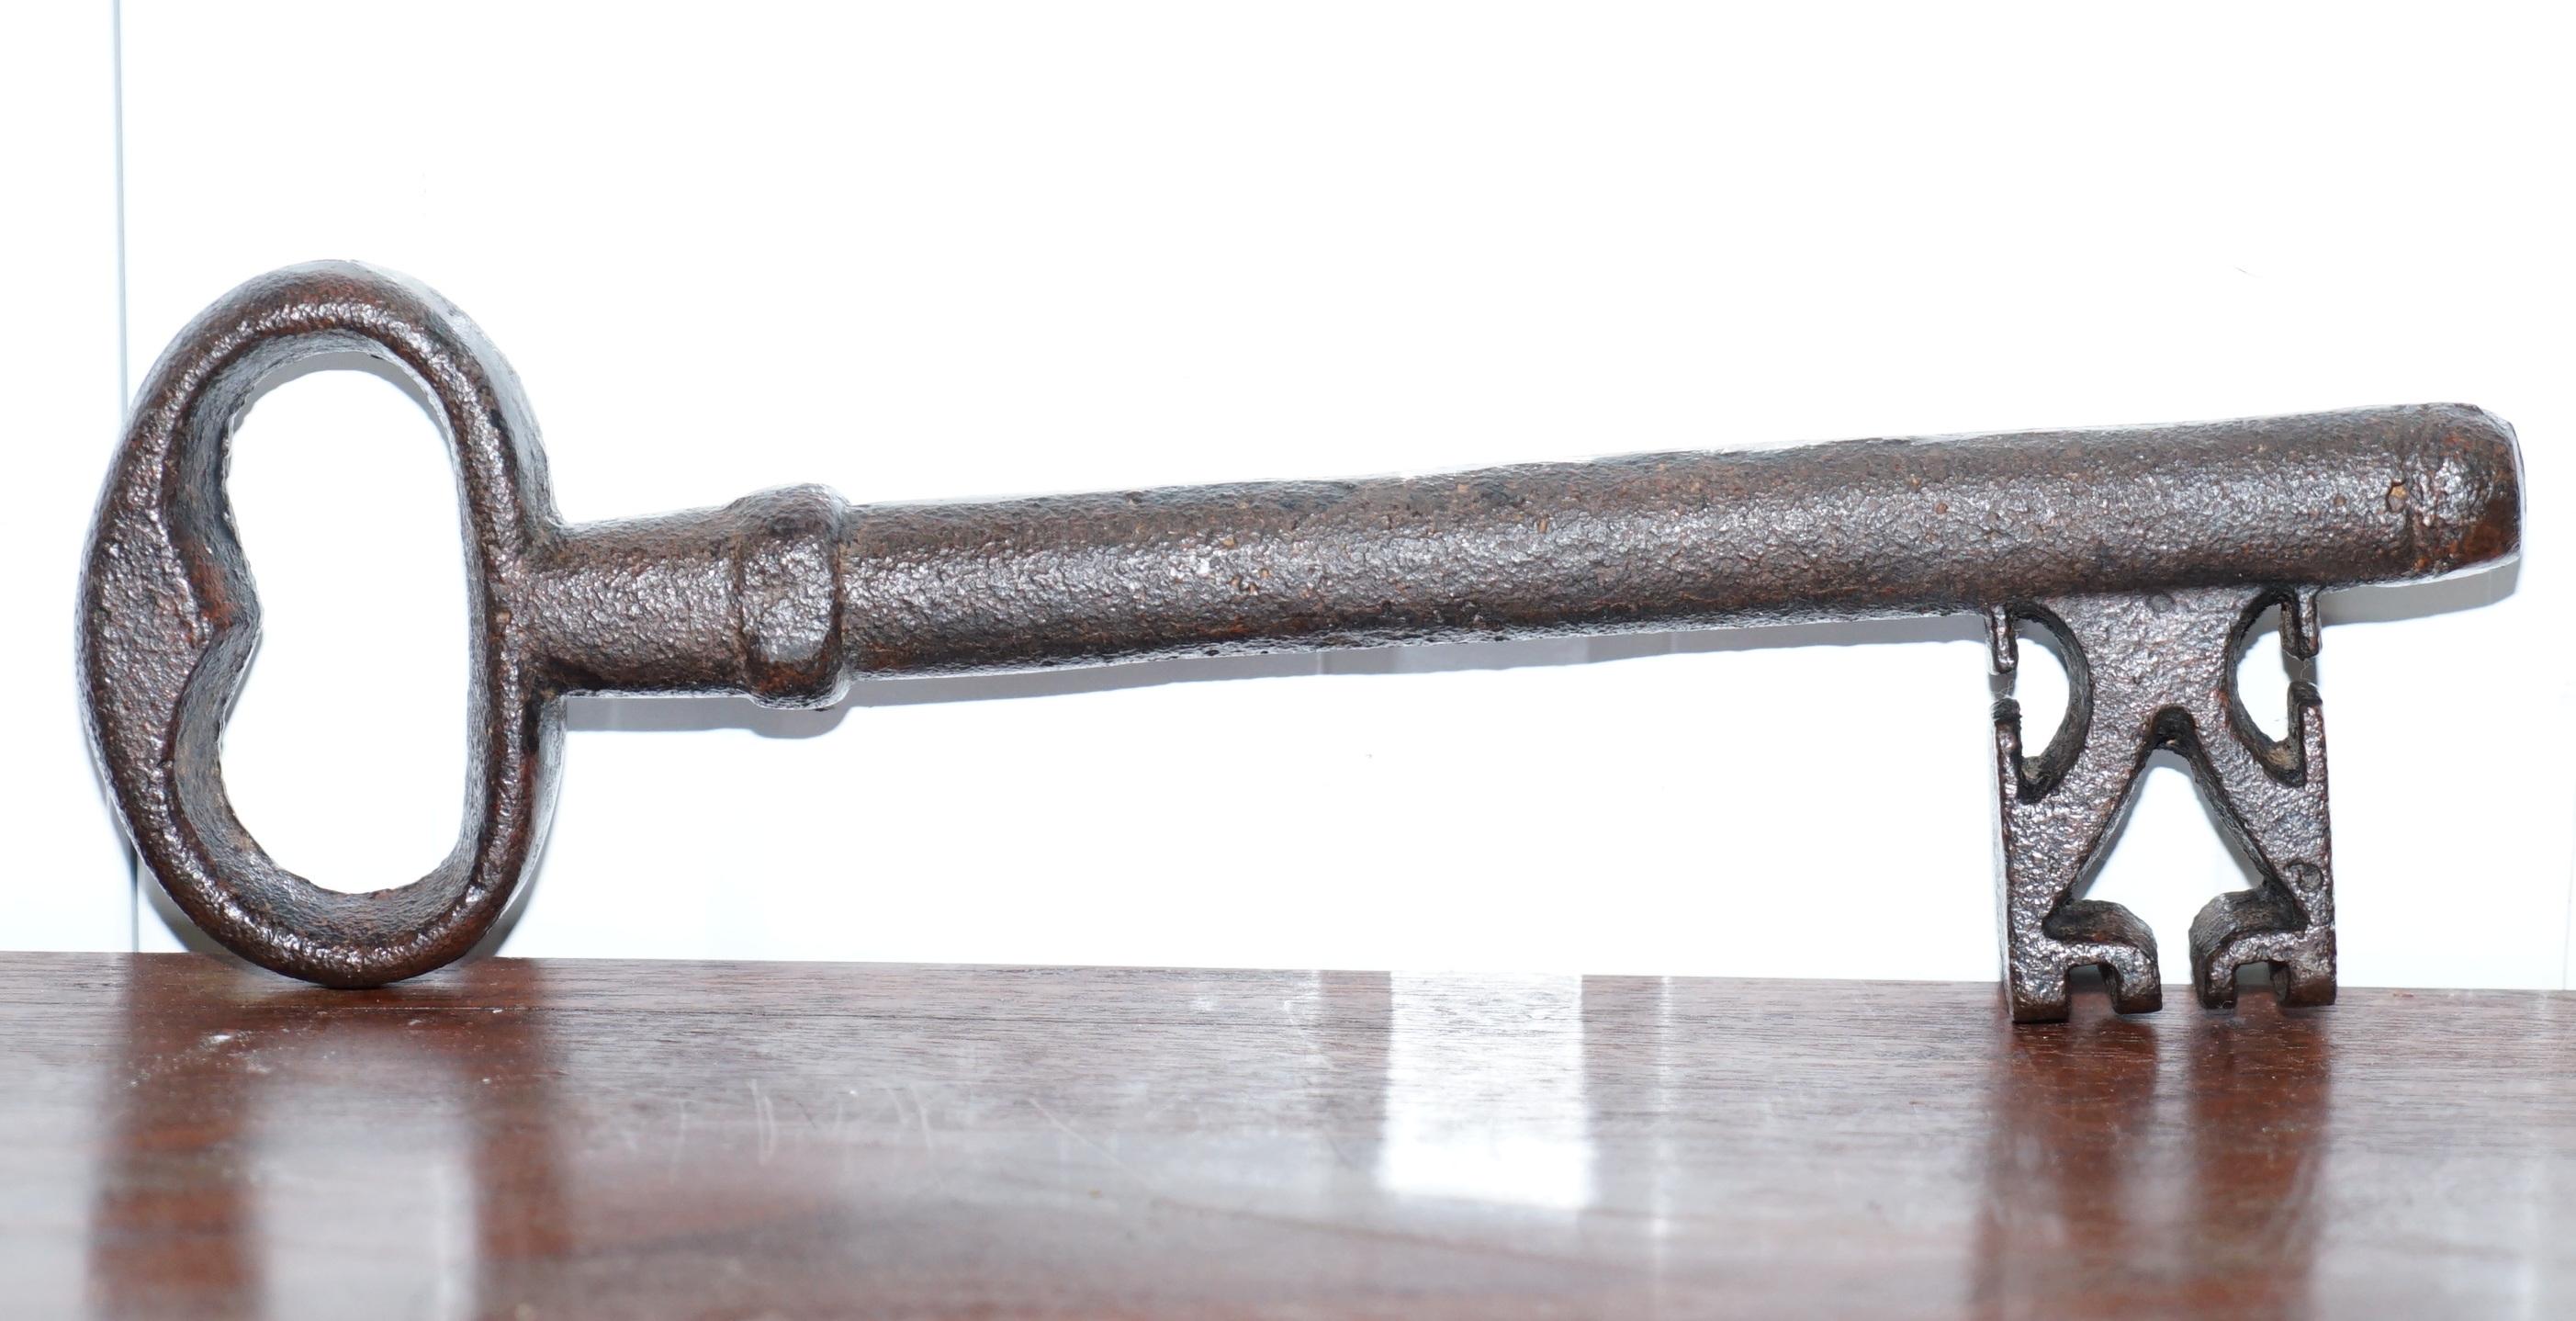 We are delighted to offer for sale this lovely hand forged 17th-century Gothic castle key.

This key is absolutely massive, I’ve honestly never seen anything like, sold as a Gothic castle door key, it must have been to lower the drawer bridge so